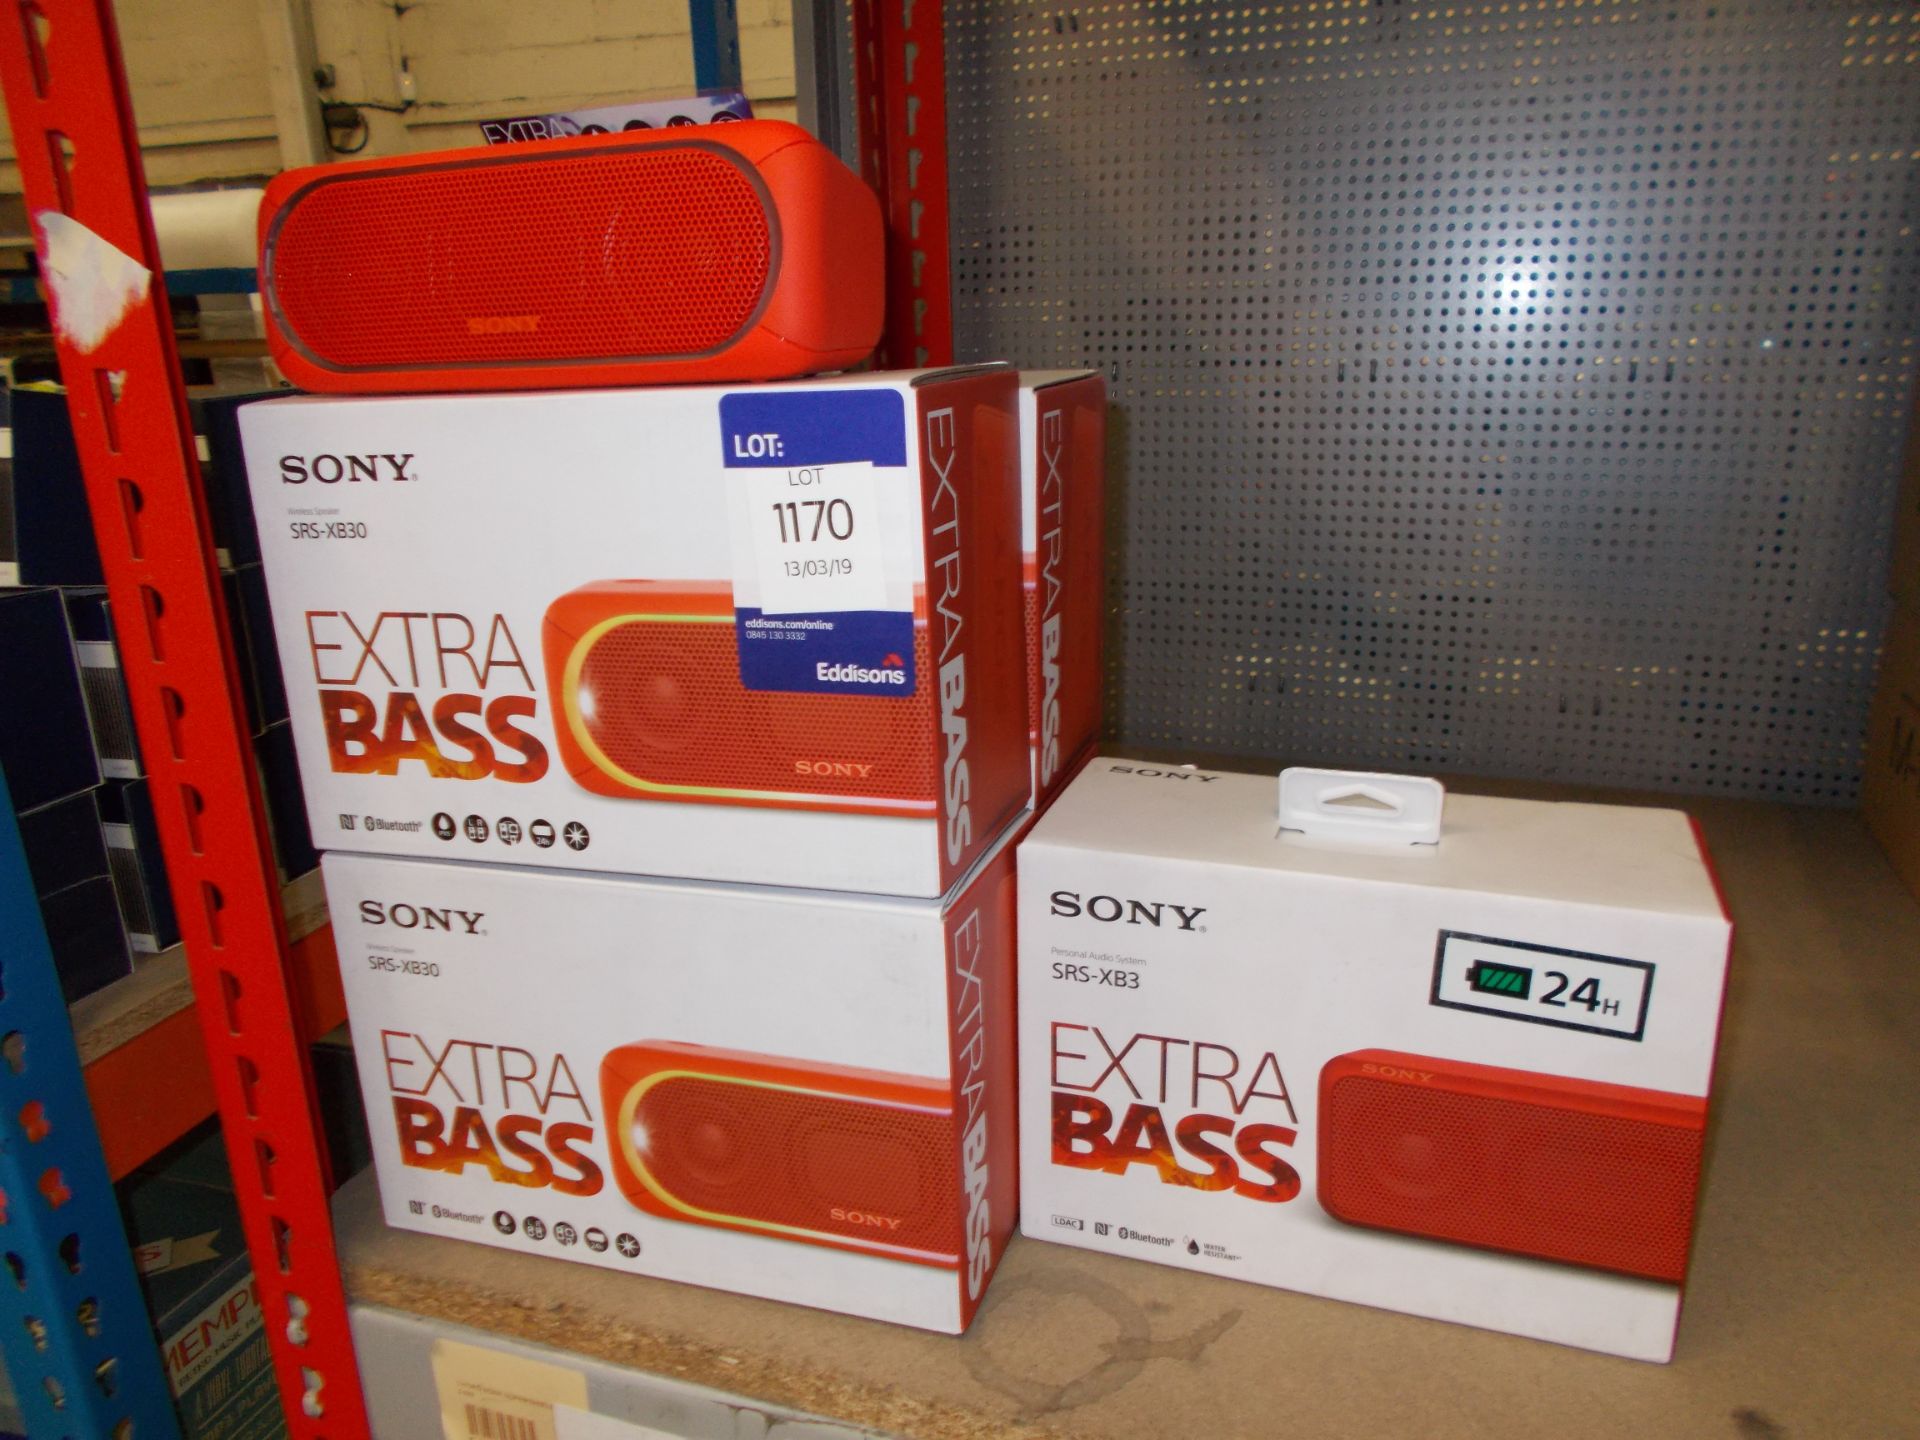 5x Sony SRS-XB30 Extra Bass Blue Tooth Speaker (1x on display & 4x boxed) – RRP £70 each